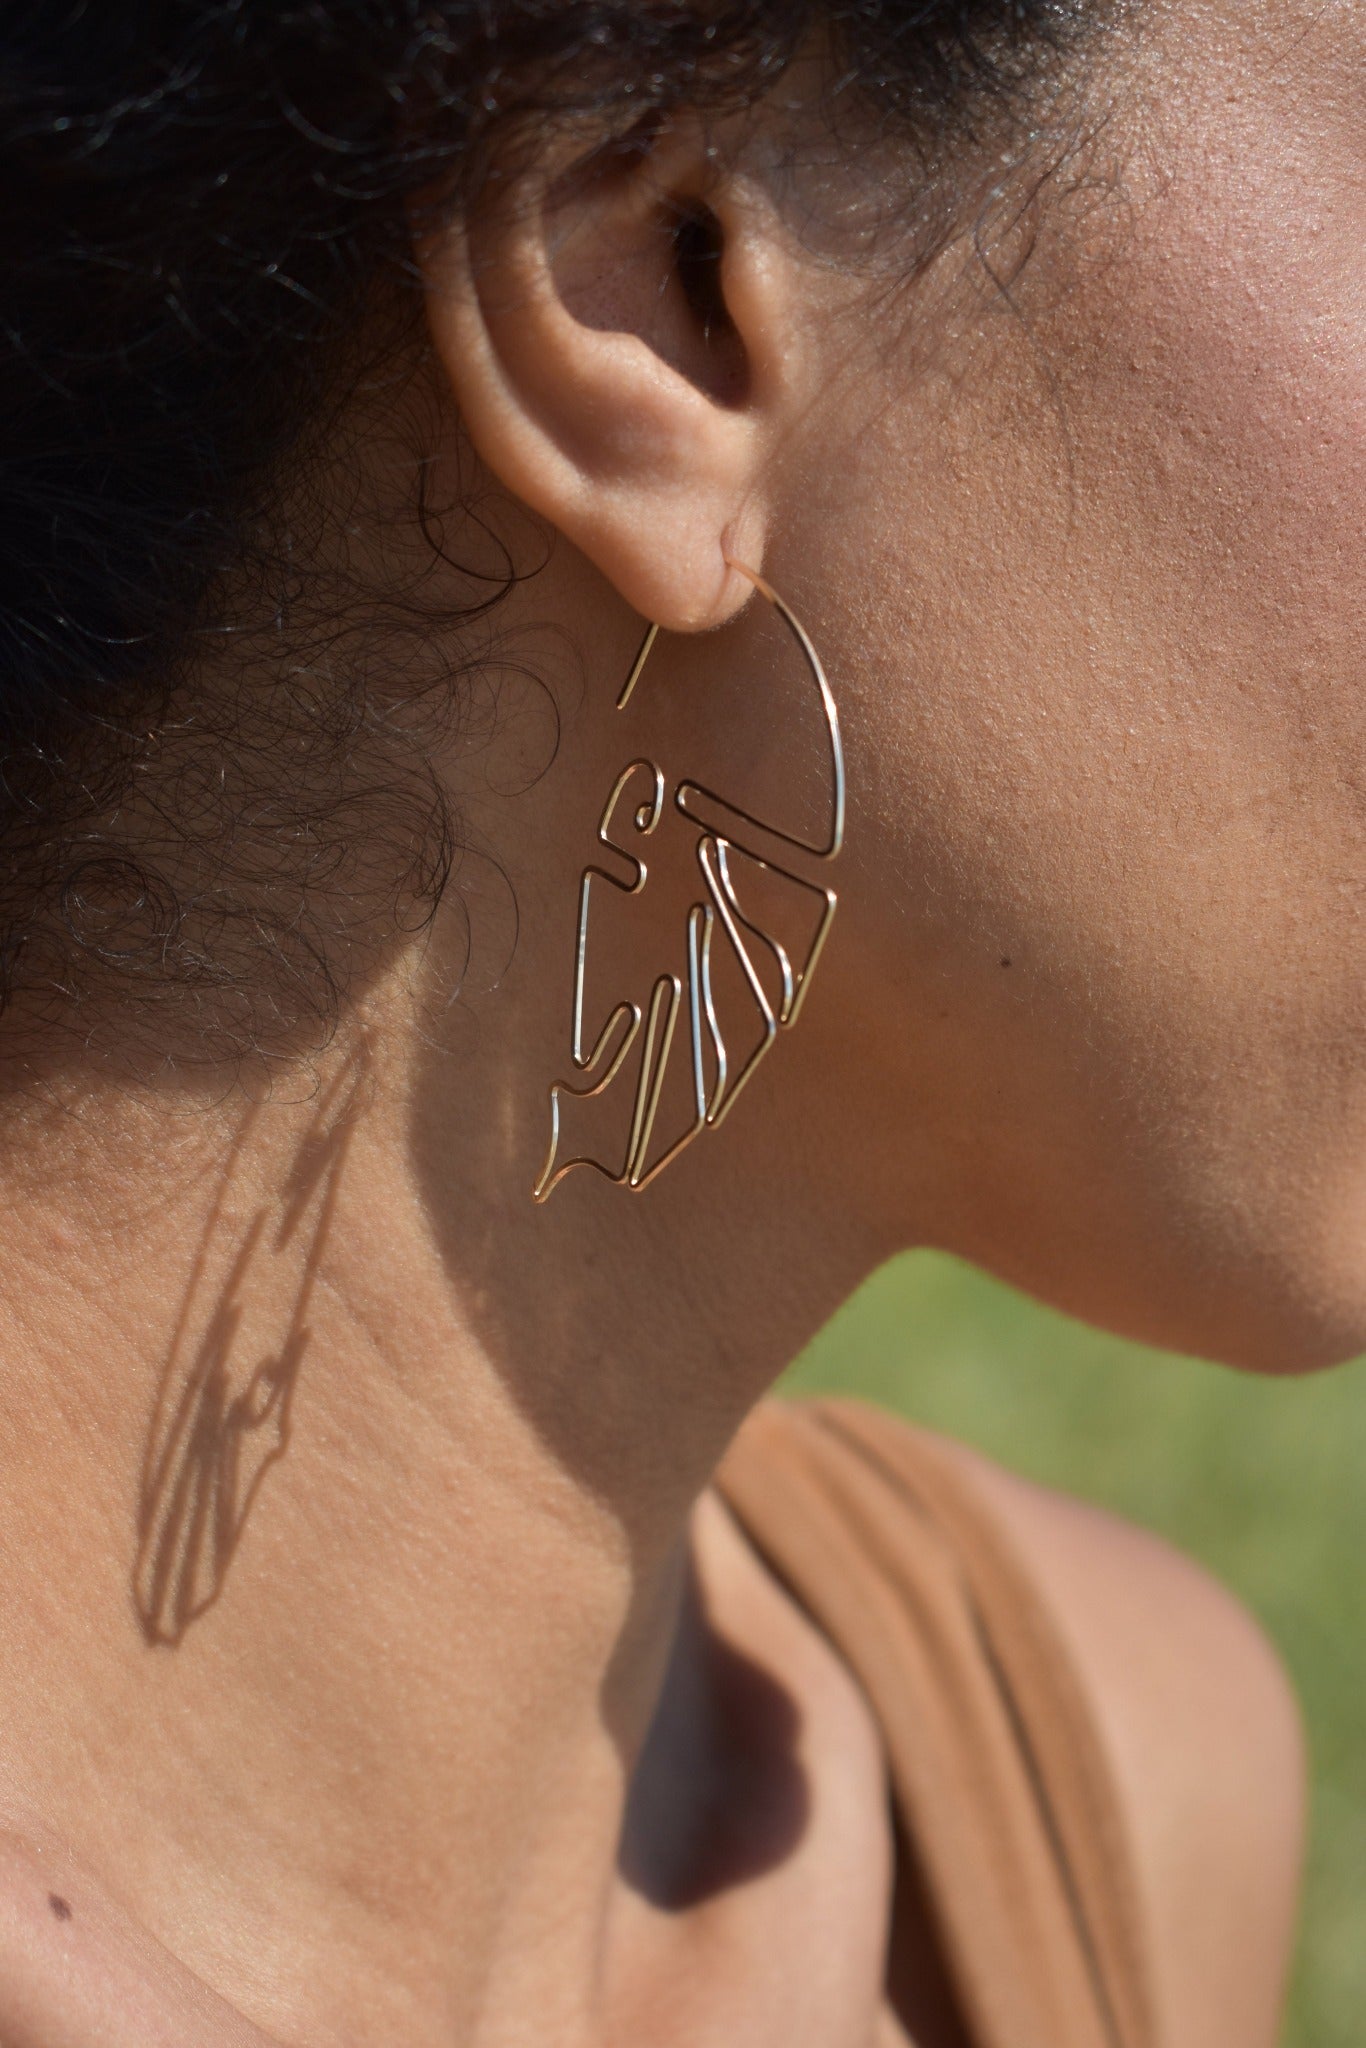 Hand formed sculptural wire earrings inspired by the monstera plant leaf